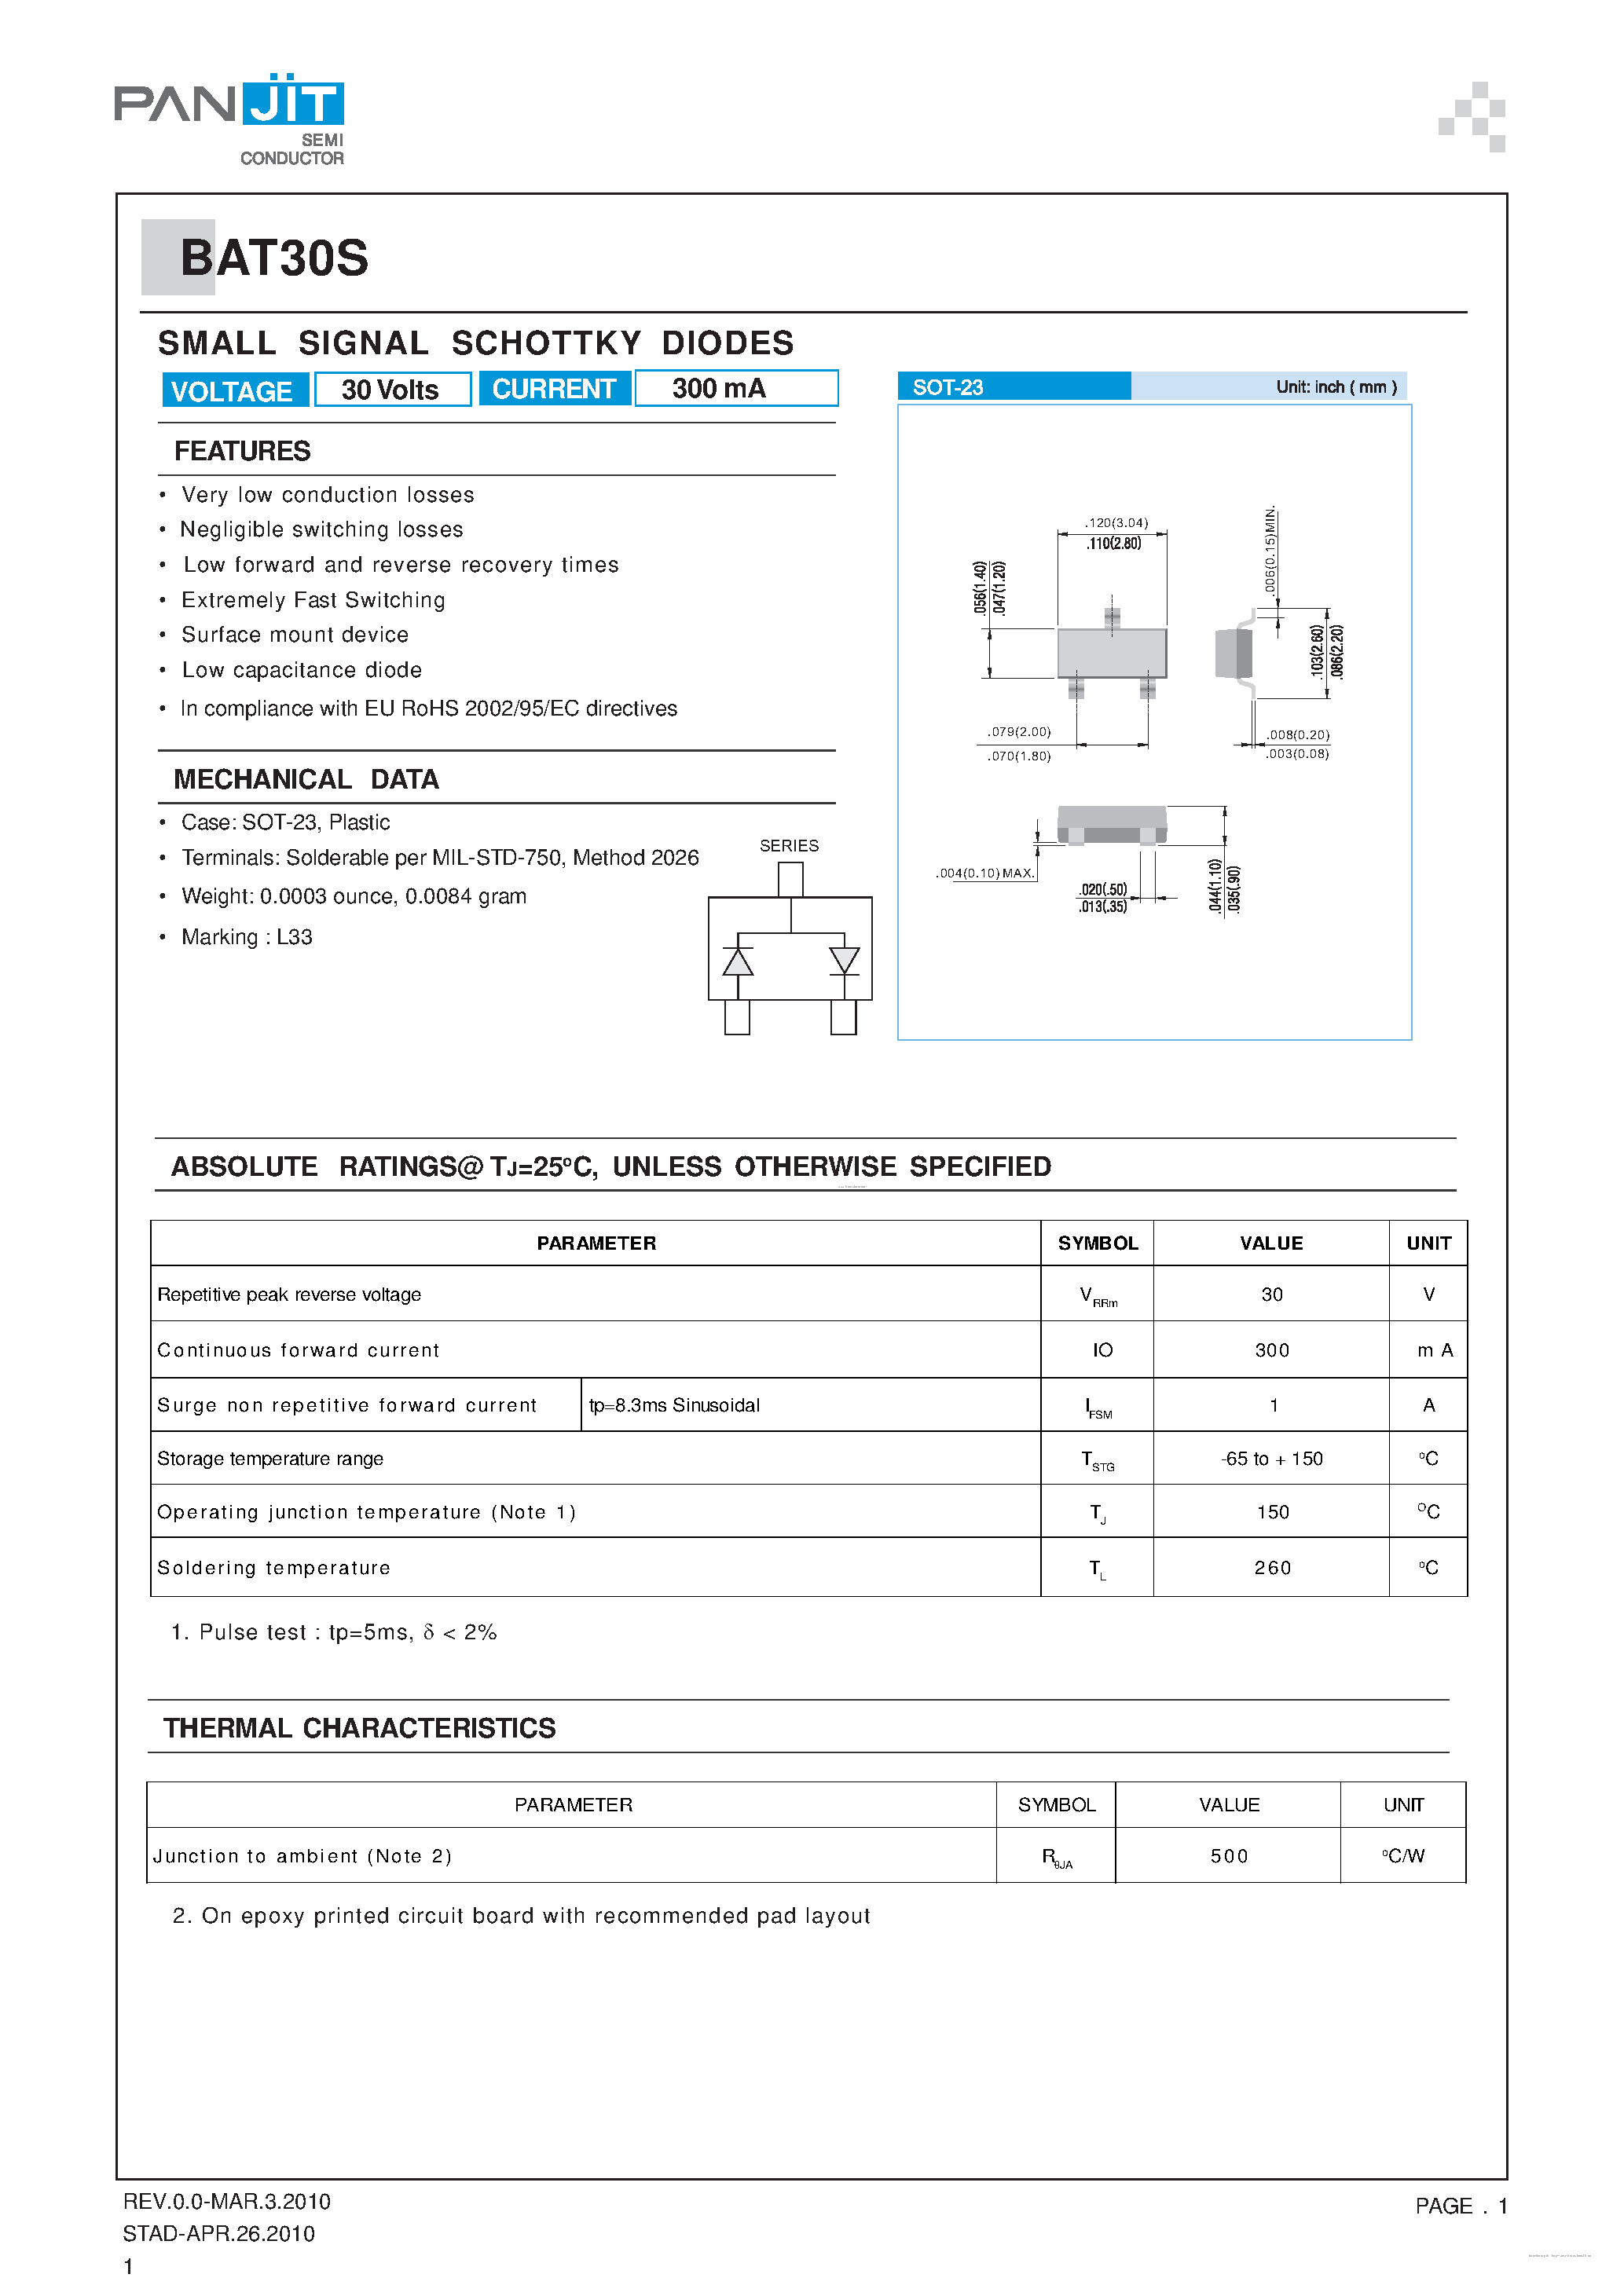 Datasheet BAT30S - SMALL SIGNAL SCHOTTKY DIODES page 1